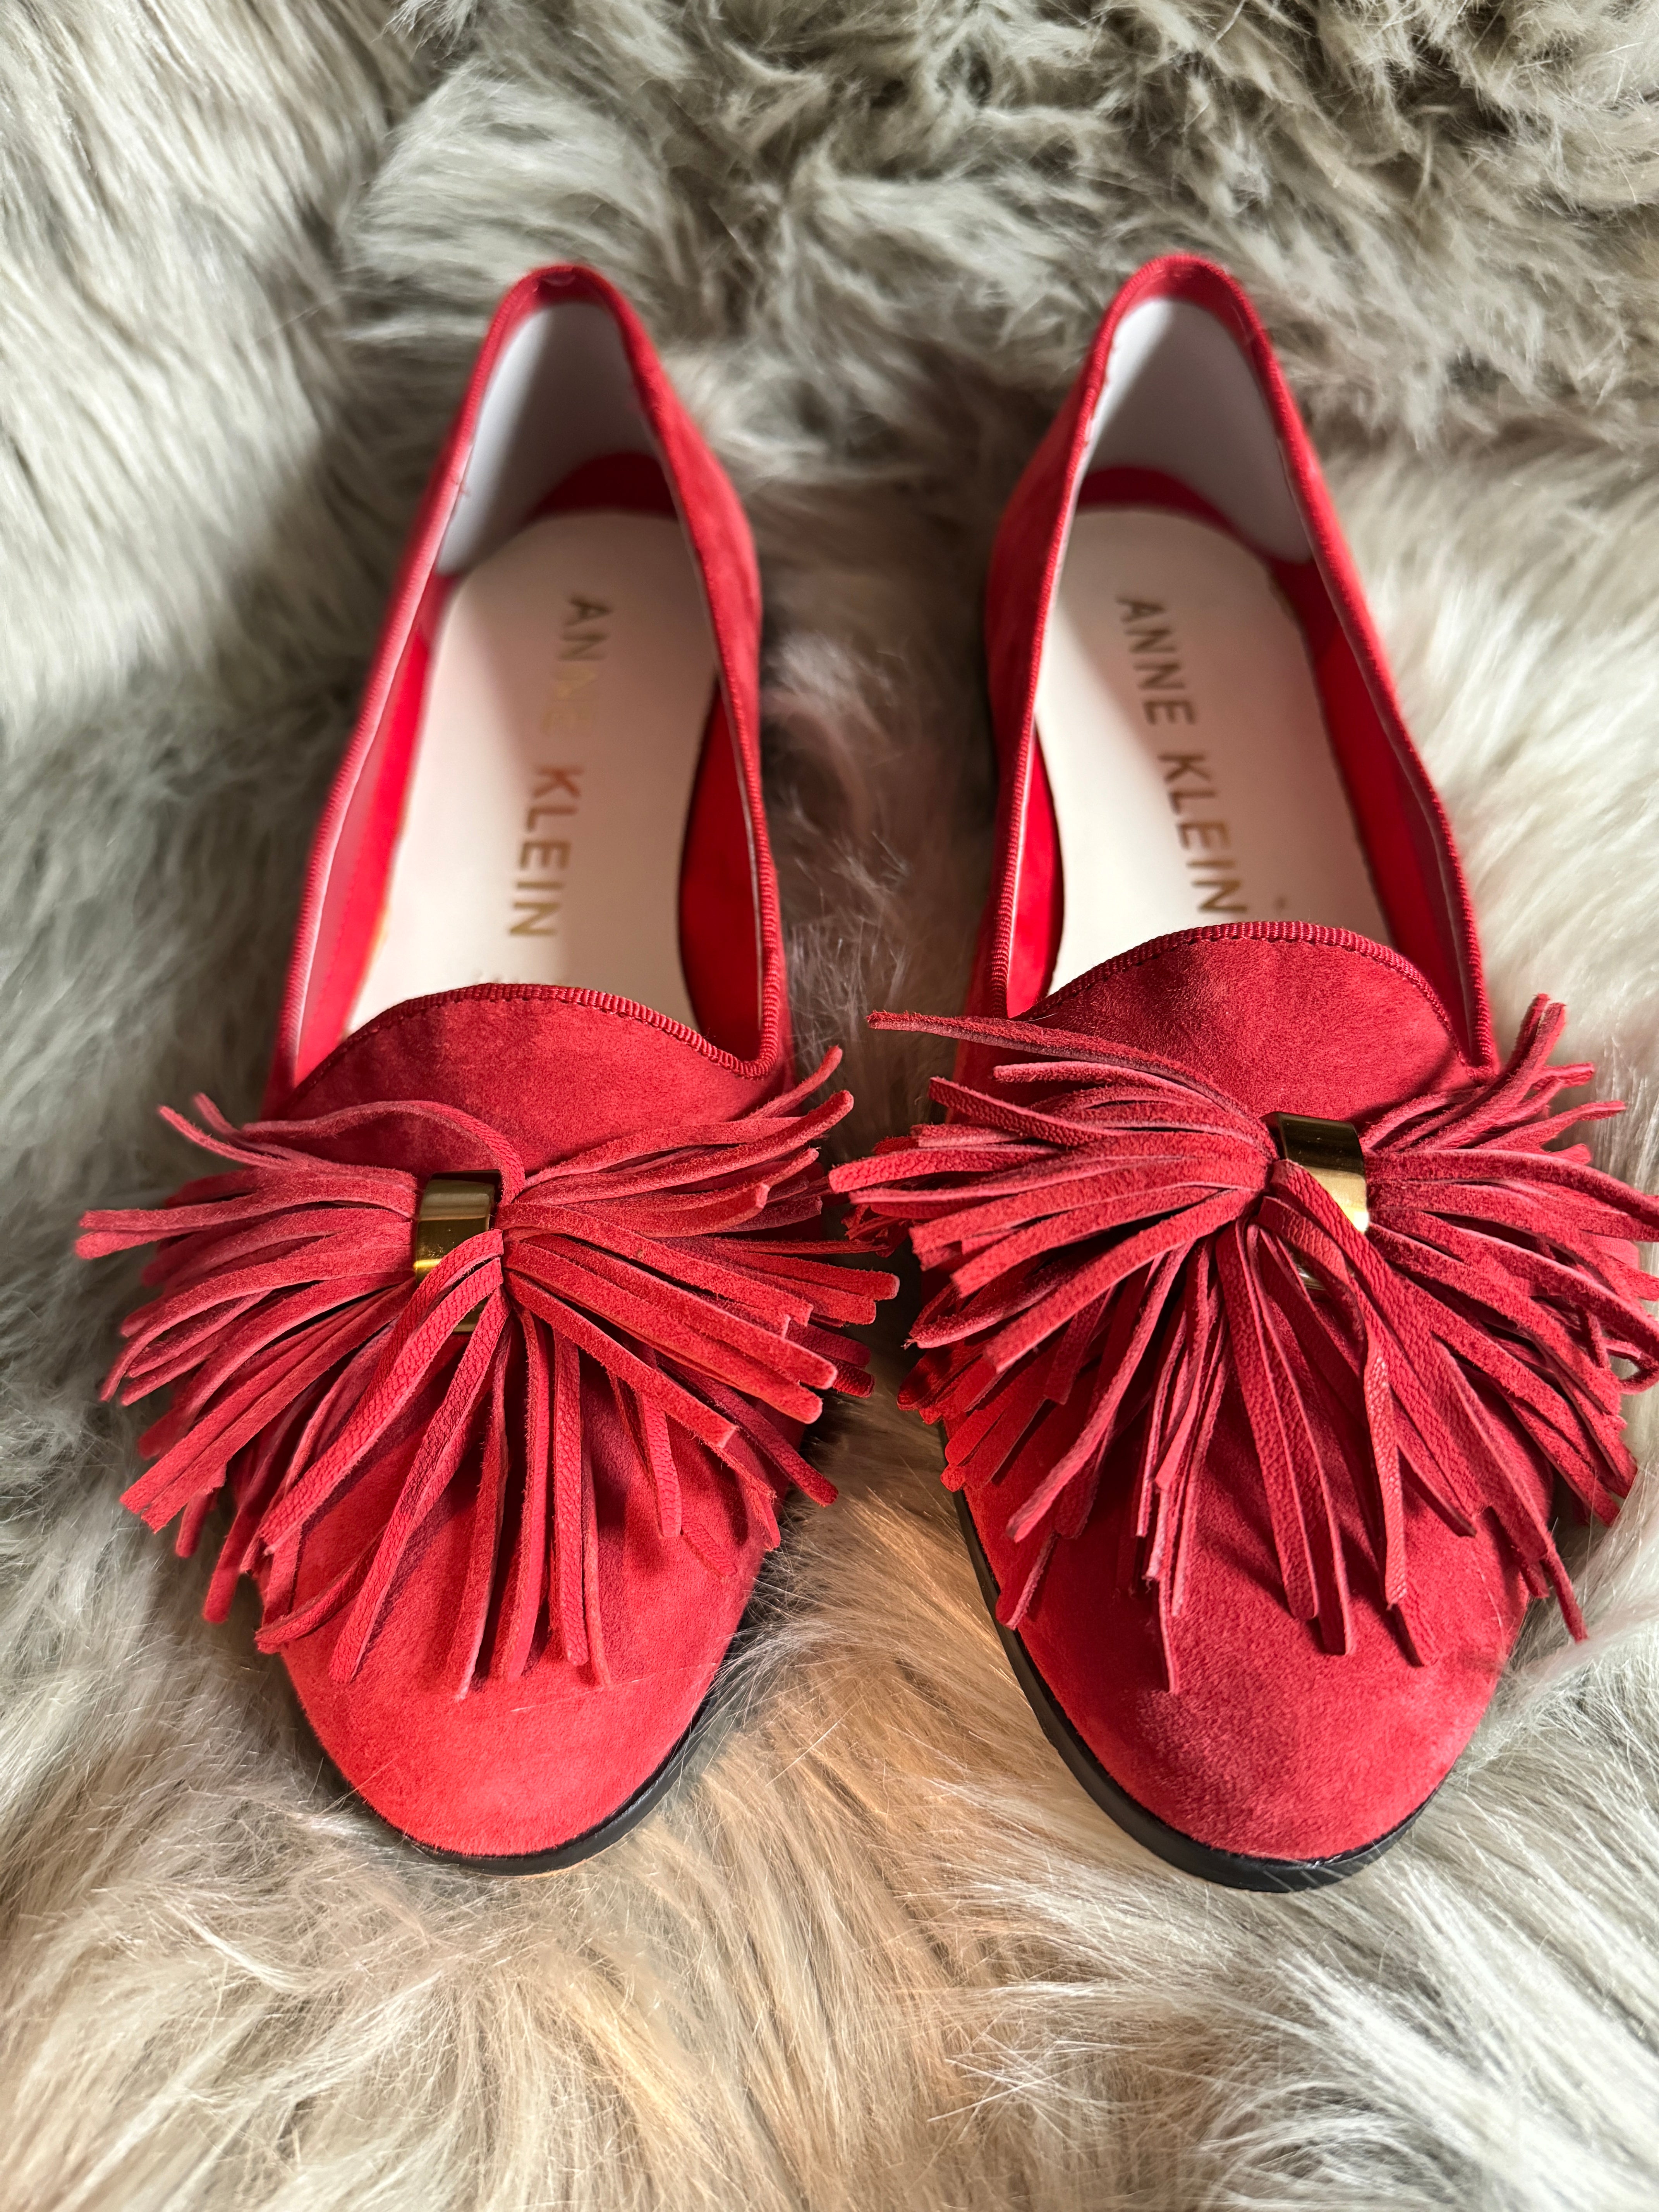 "2nd Swag Chic" Anne Klein Red Suede Flats with Tassels